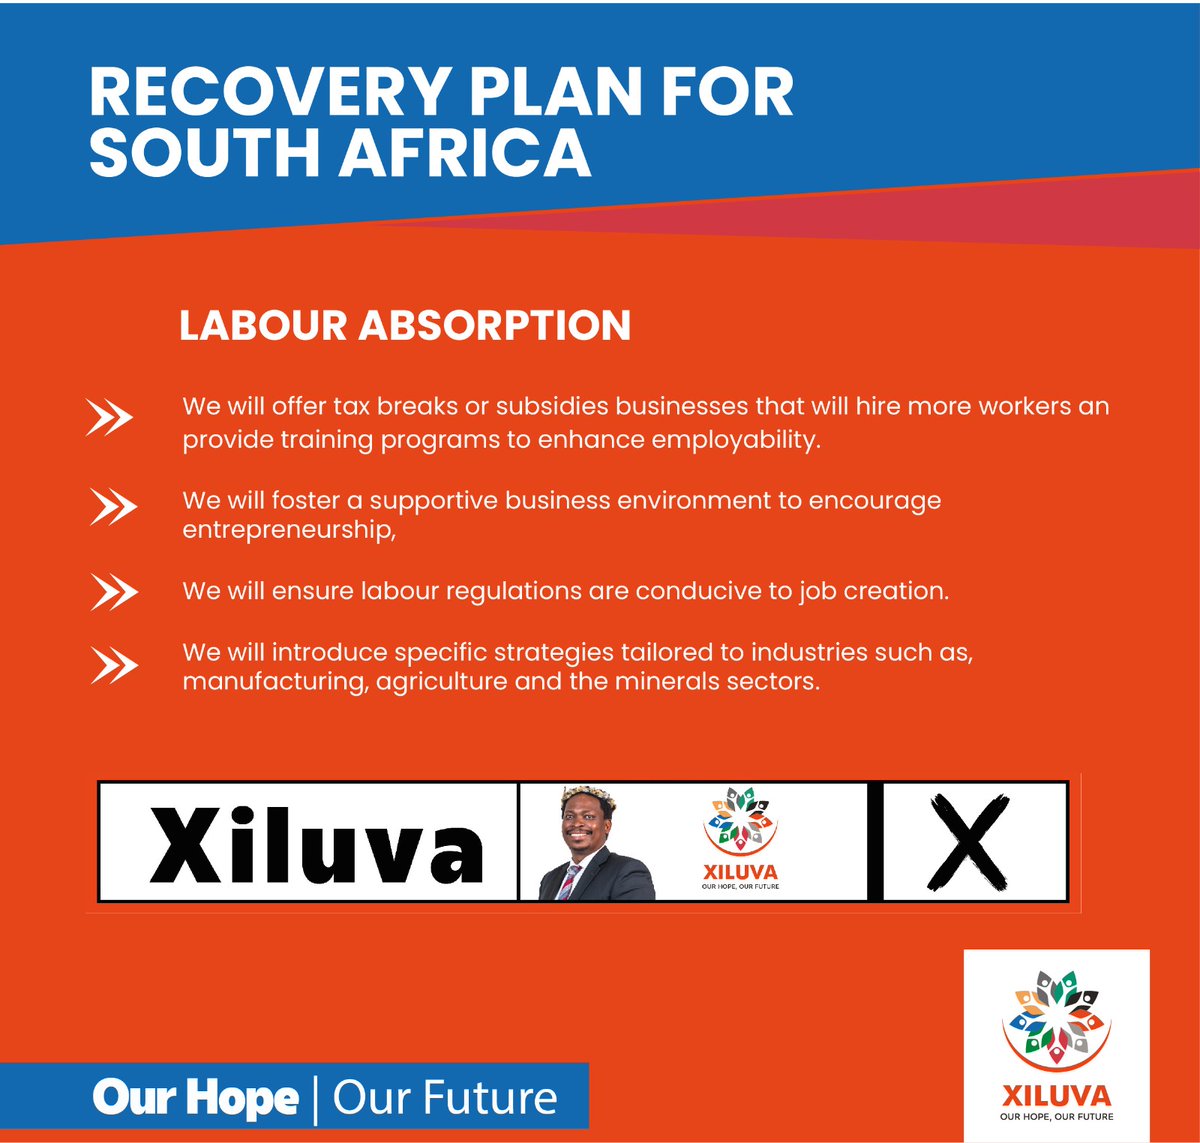 'Have you seen our Recovery Plan for 2024? If you haven't had the opportunity, please go check it out and share your thoughts with us.' #VoteXiluva #BonganiBaloyi #OurHopeOurFuture #Elections2024🇿🇦